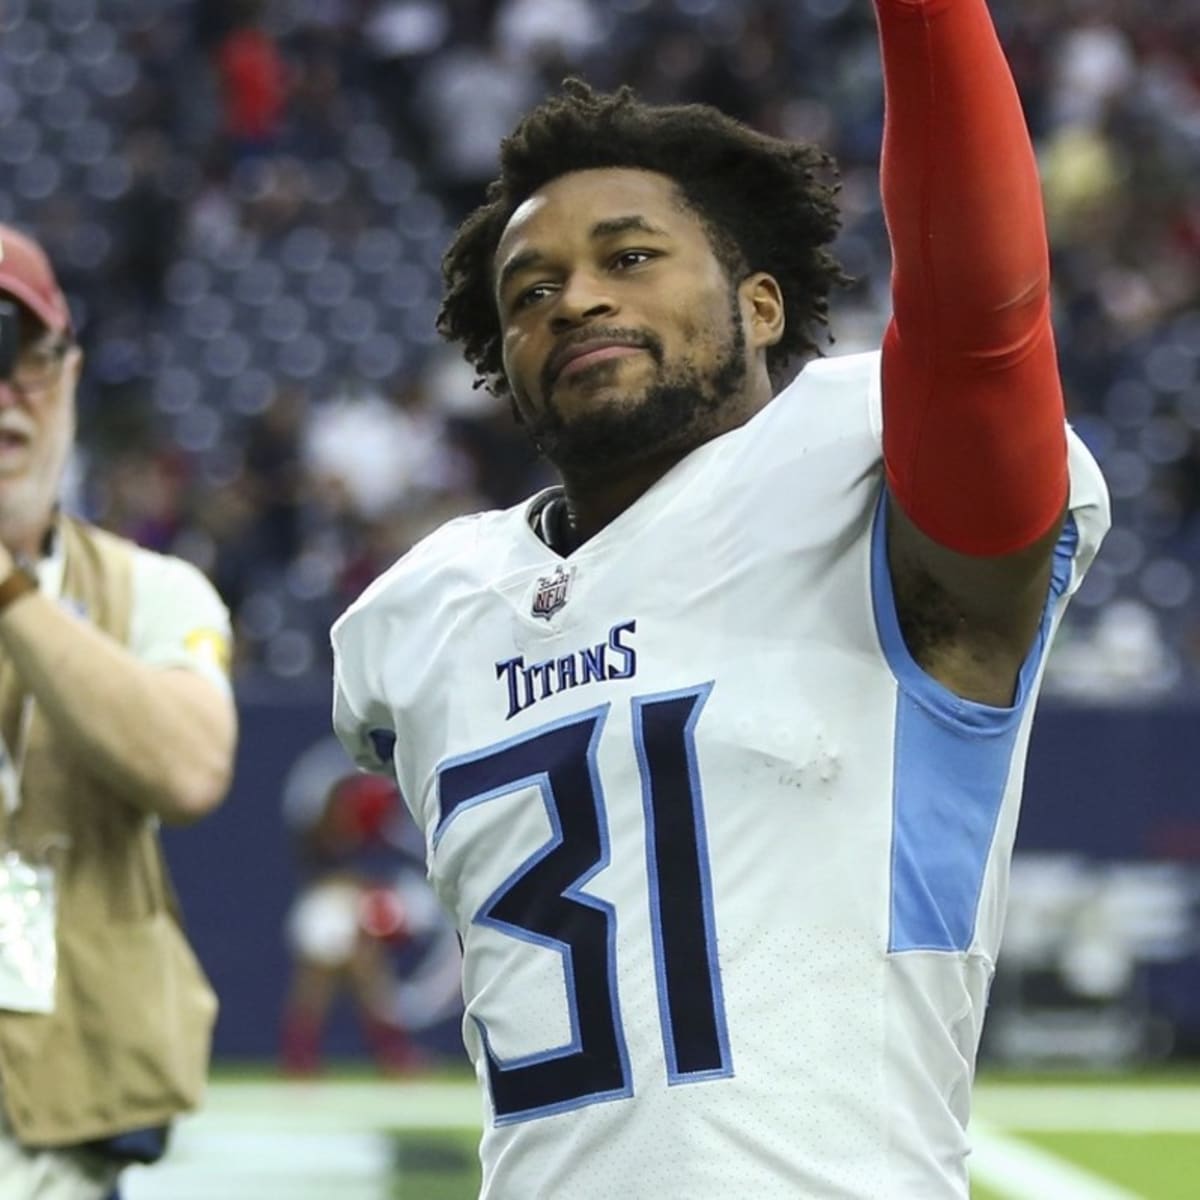 Tennessee Titans - KEVIN BYARD WITH THE INTERCEPTION!